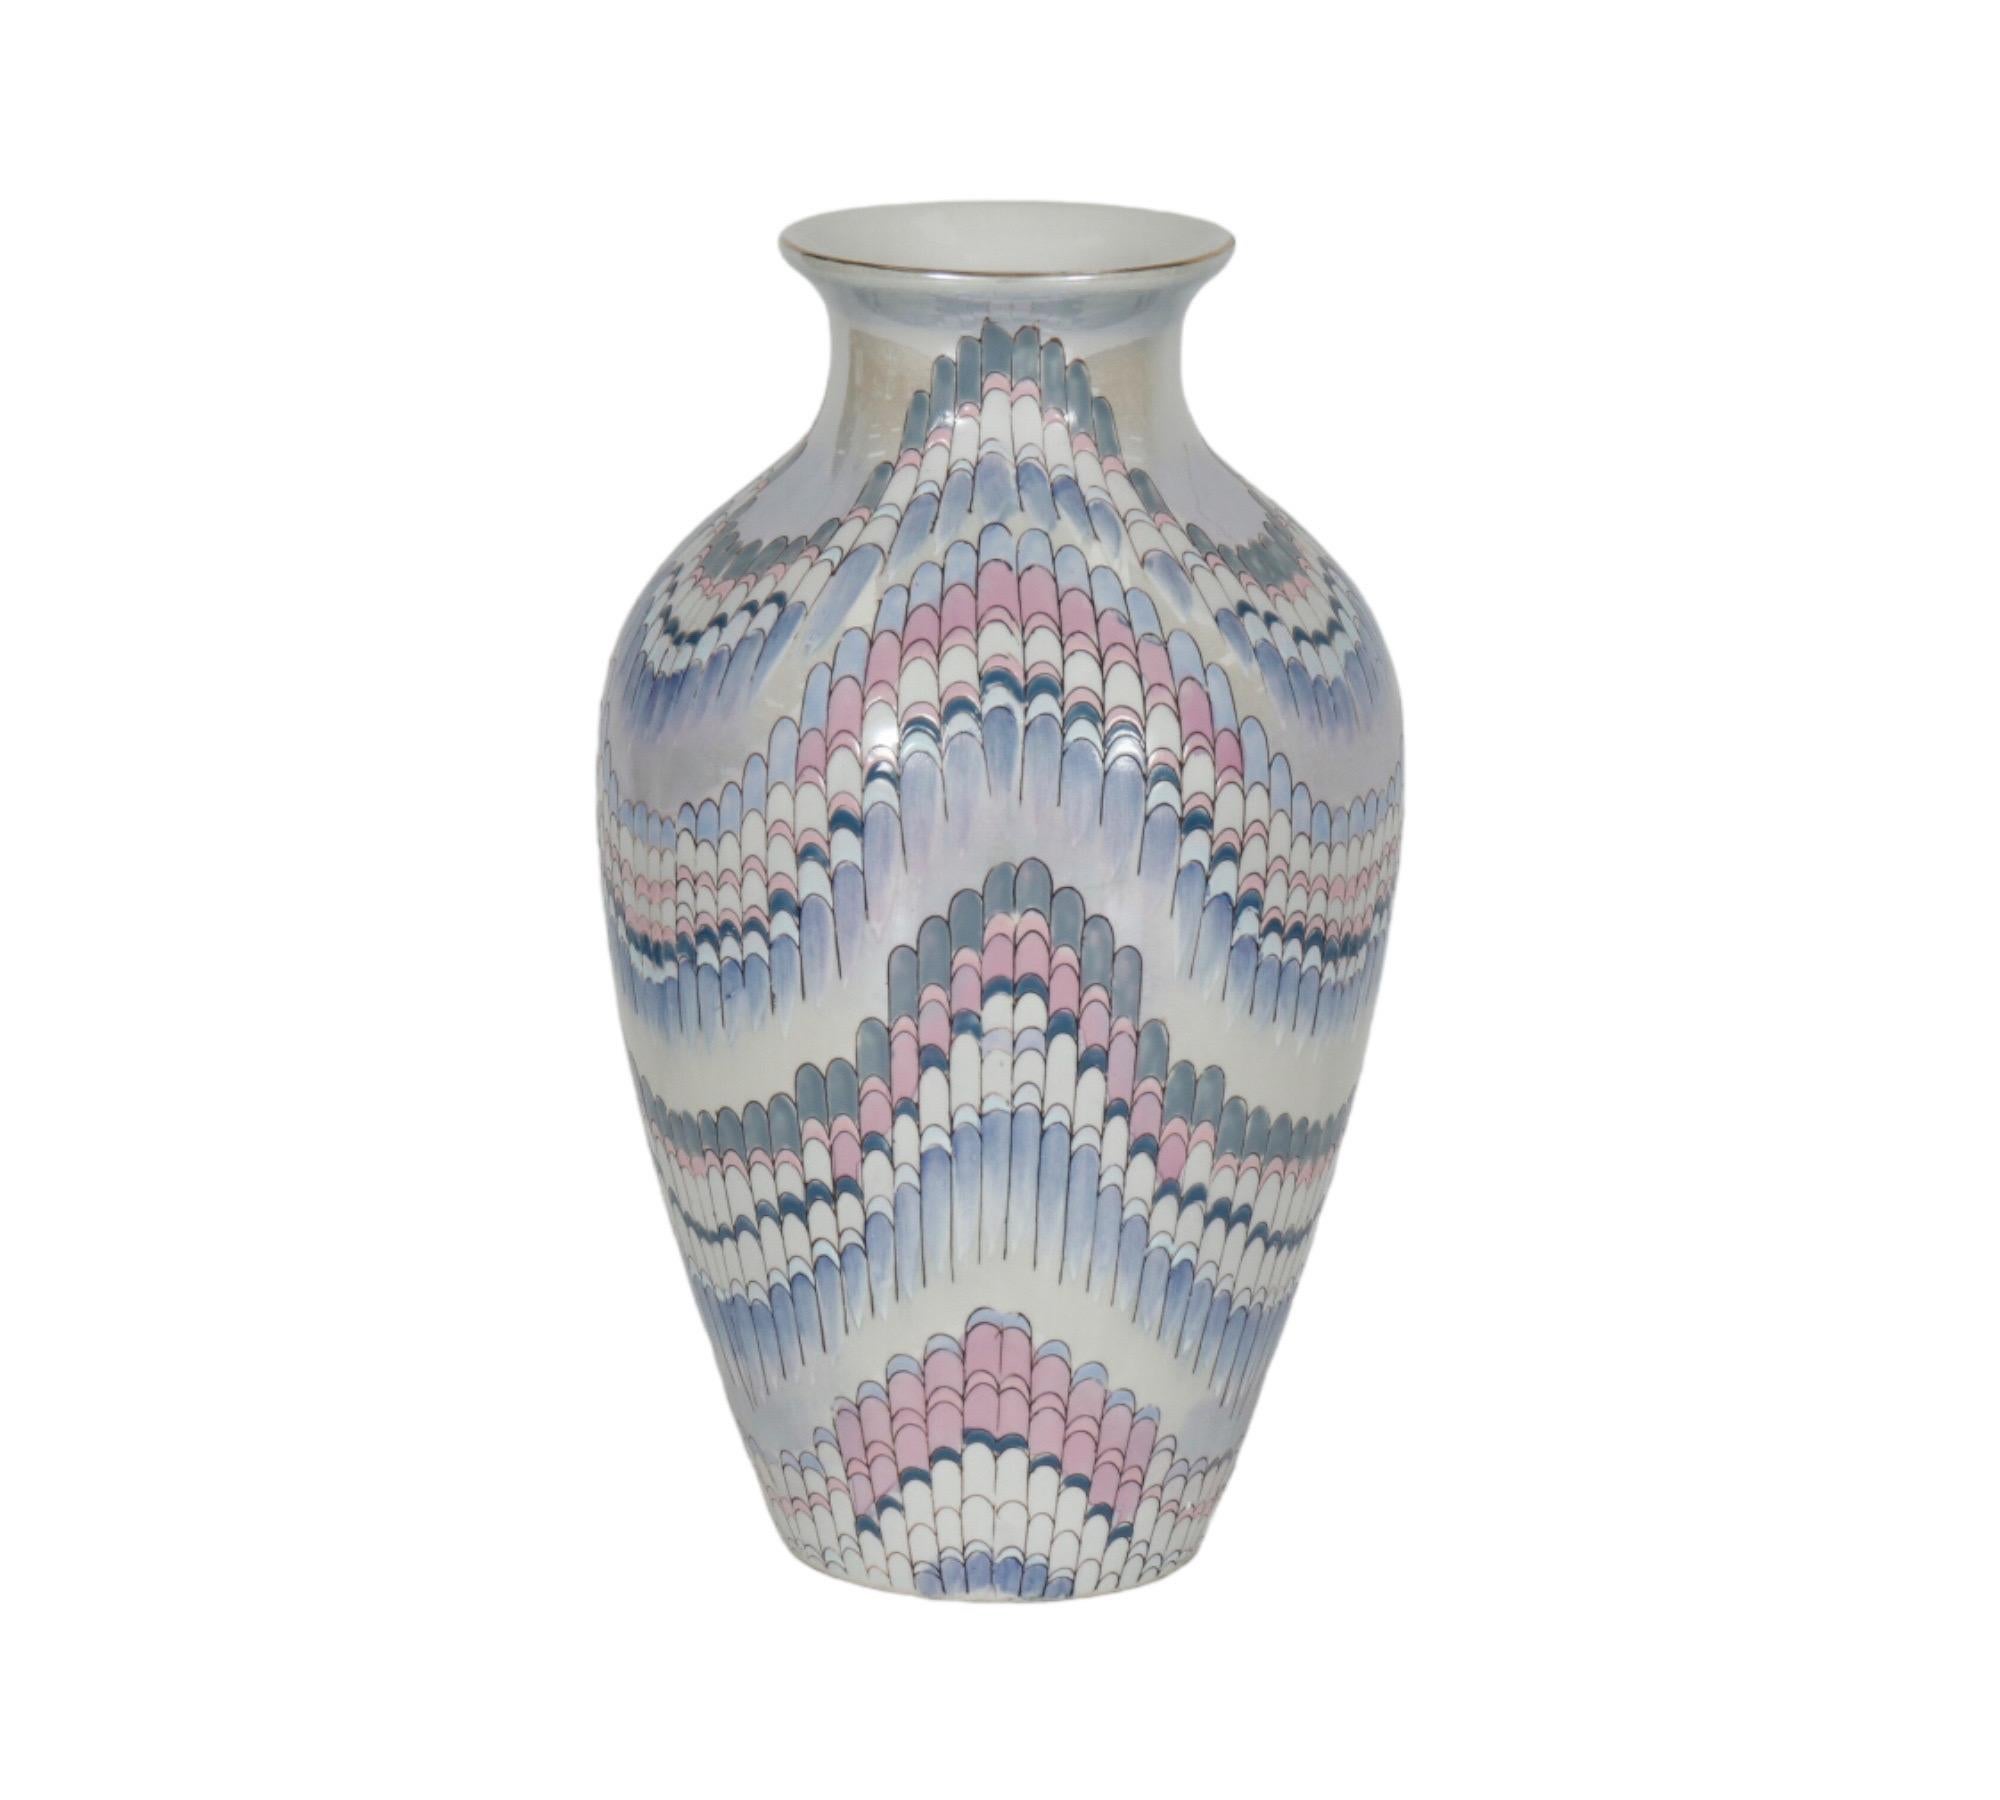 A Nouveau Lustre ceramic vase made by Toyo. Lightly embossed with a flame stitch pattern and hand painted with iridescent pink, purple, blue and jade hues over white. Marked underneath ‘Nouveau Lustre, Toyo, Made in China’.
